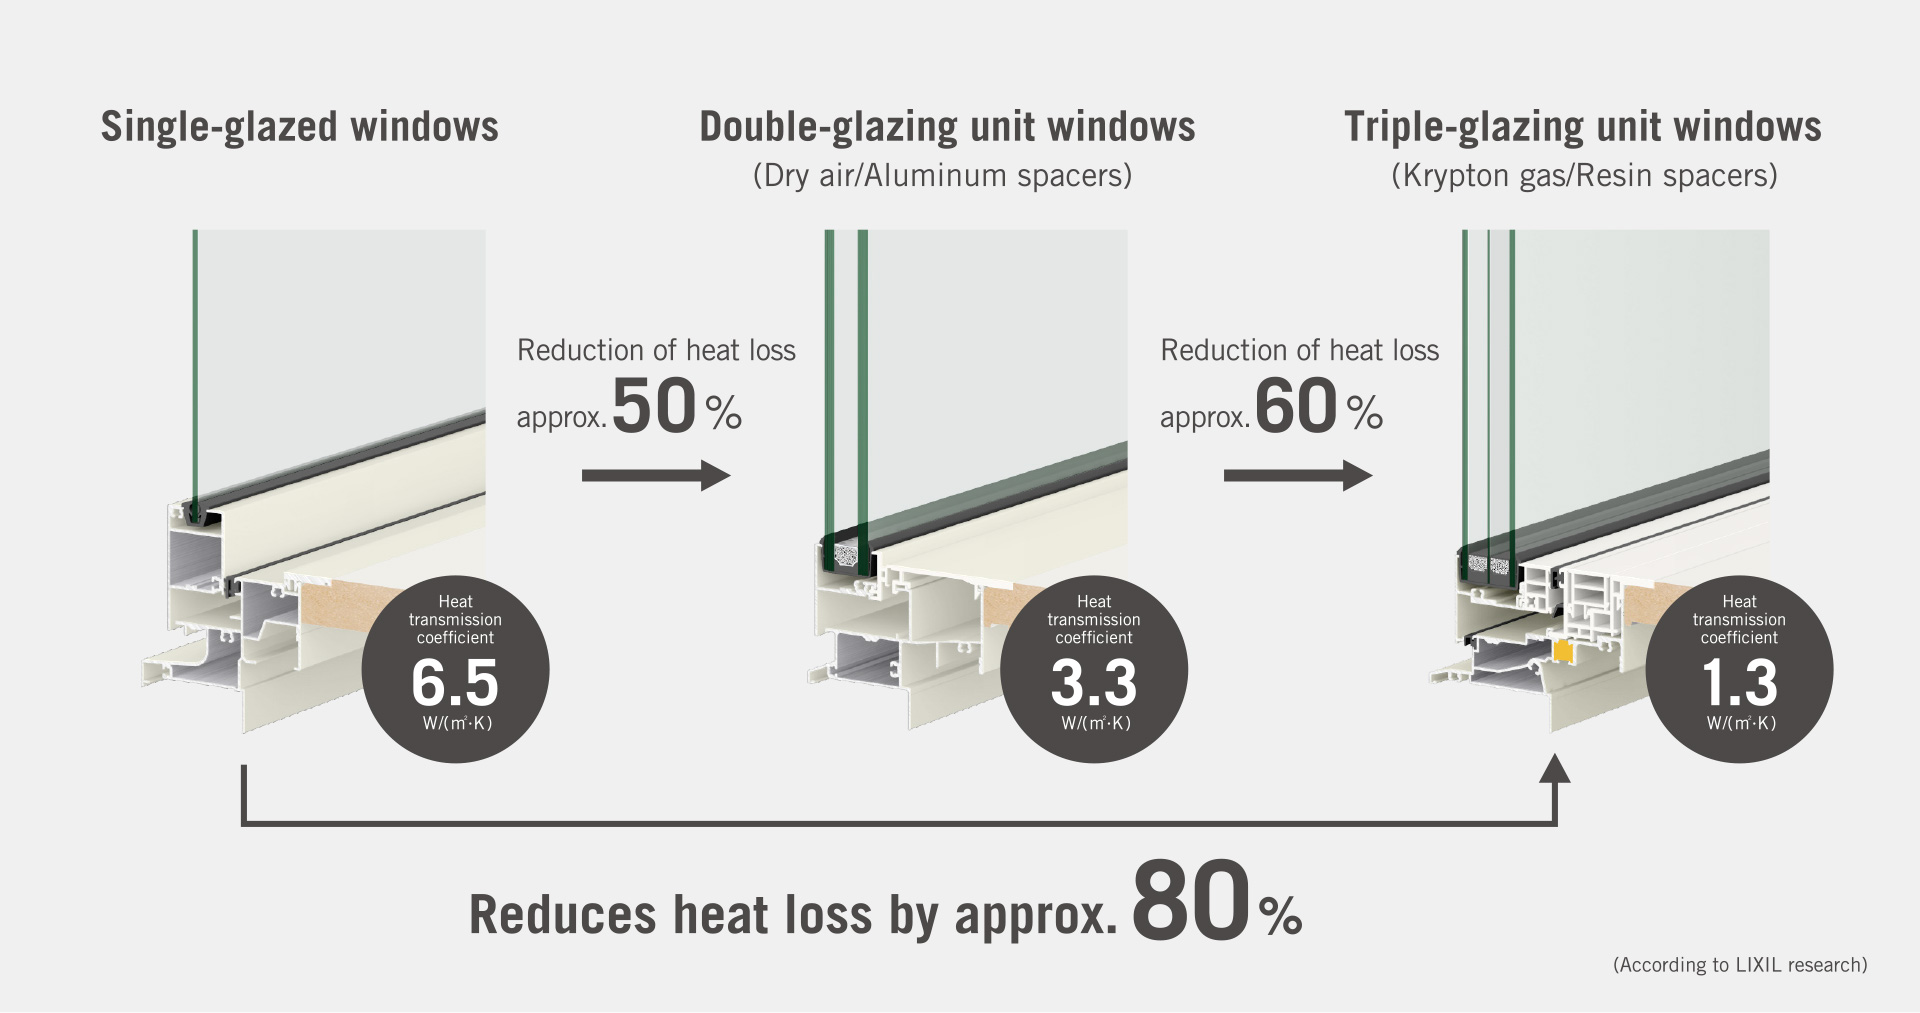 Triple glazing unit significantly improves home insulation